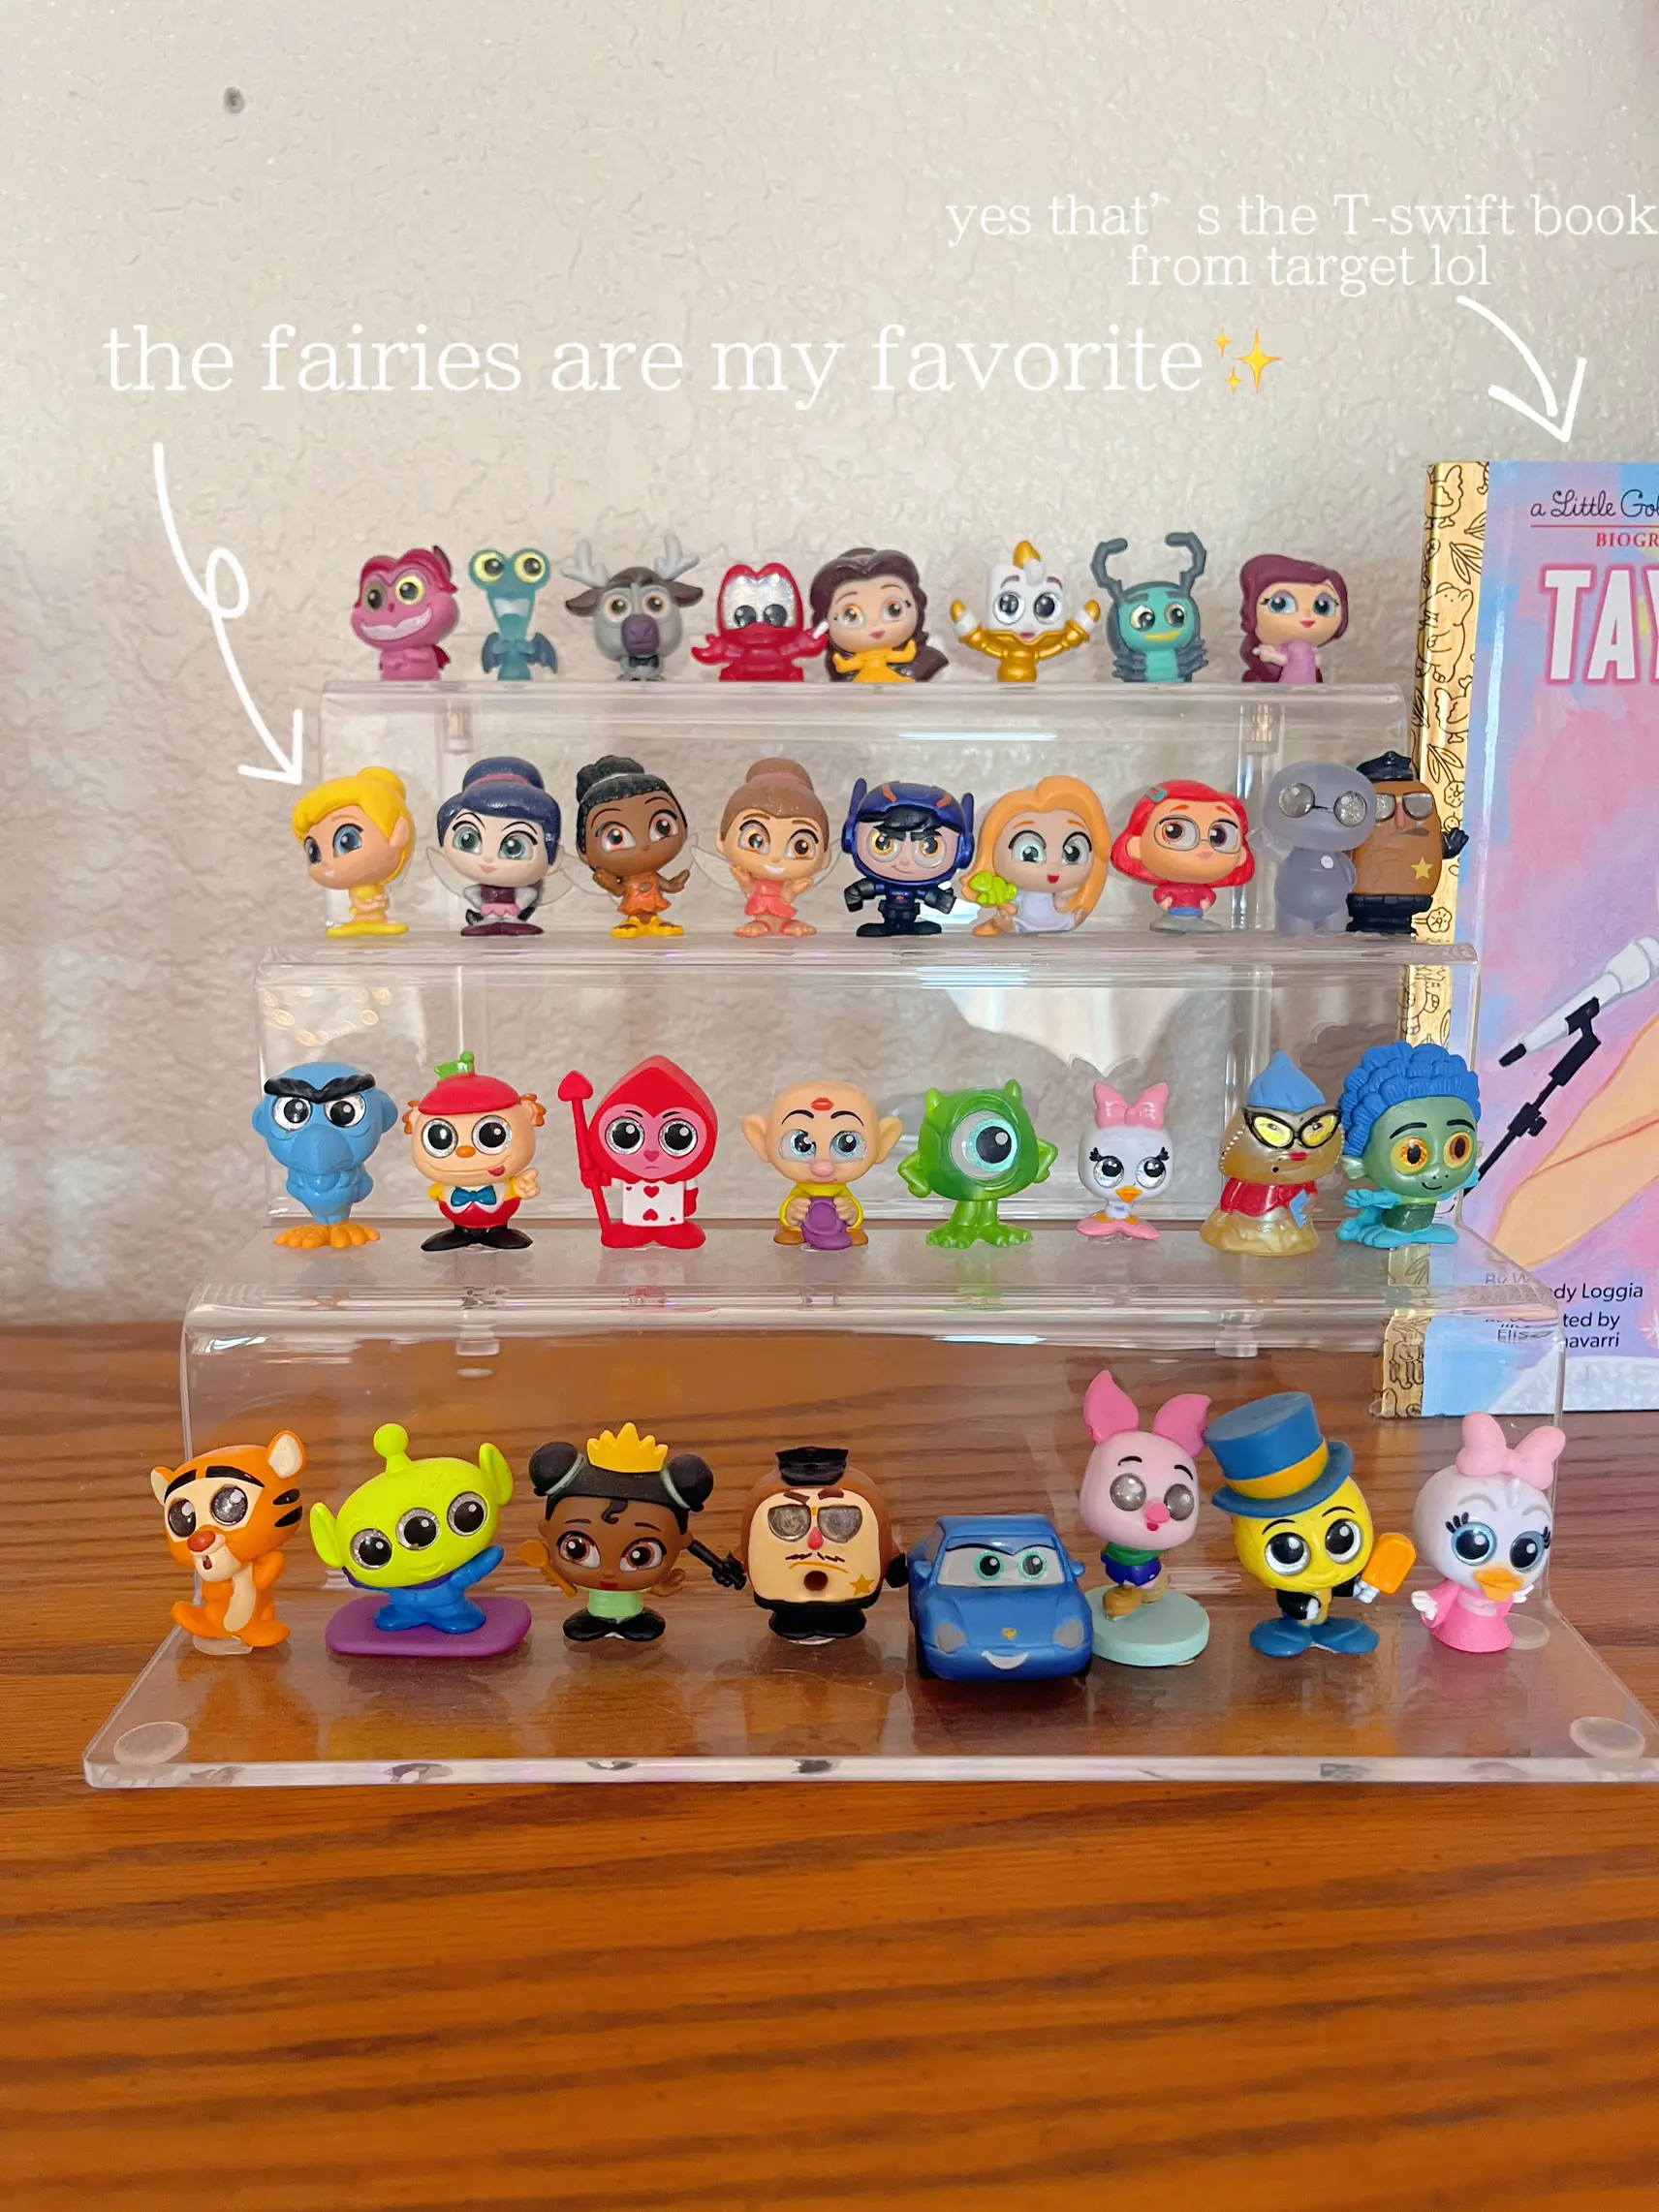 How to display your Disney pins, Gallery posted by Liz Azus